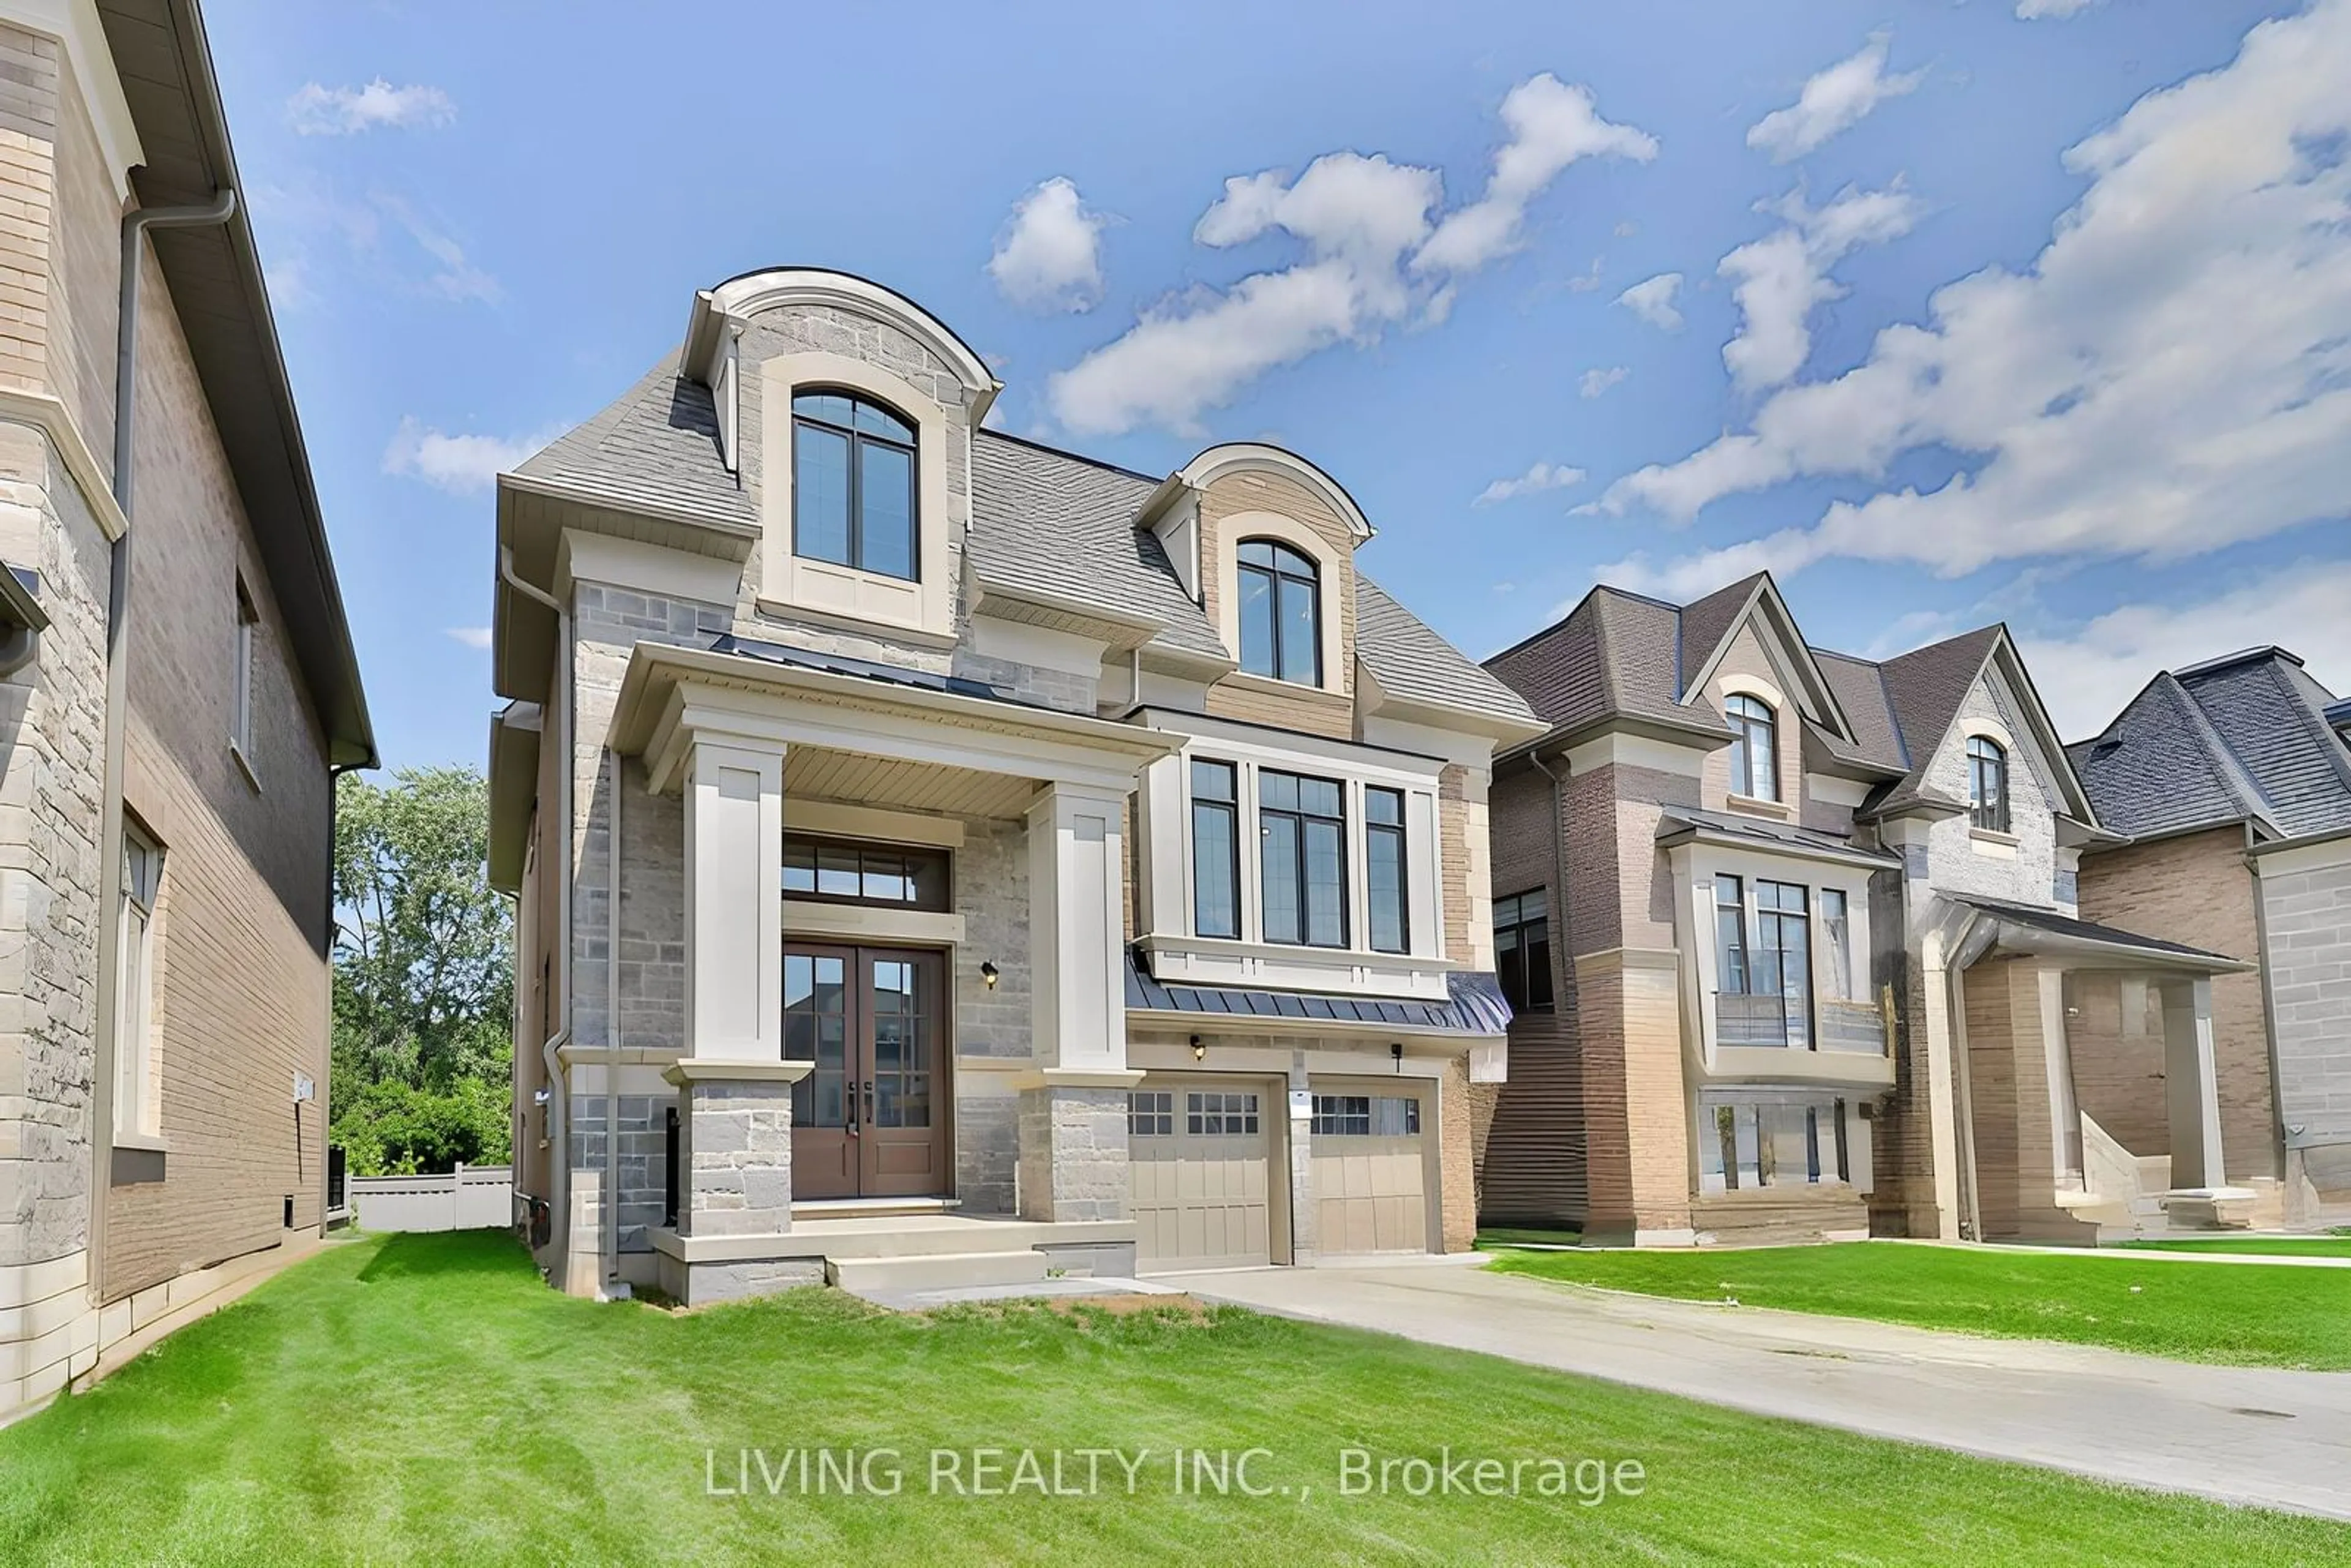 Home with brick exterior material for 11 Becky Cheung Crt, Toronto Ontario M2M 0B7